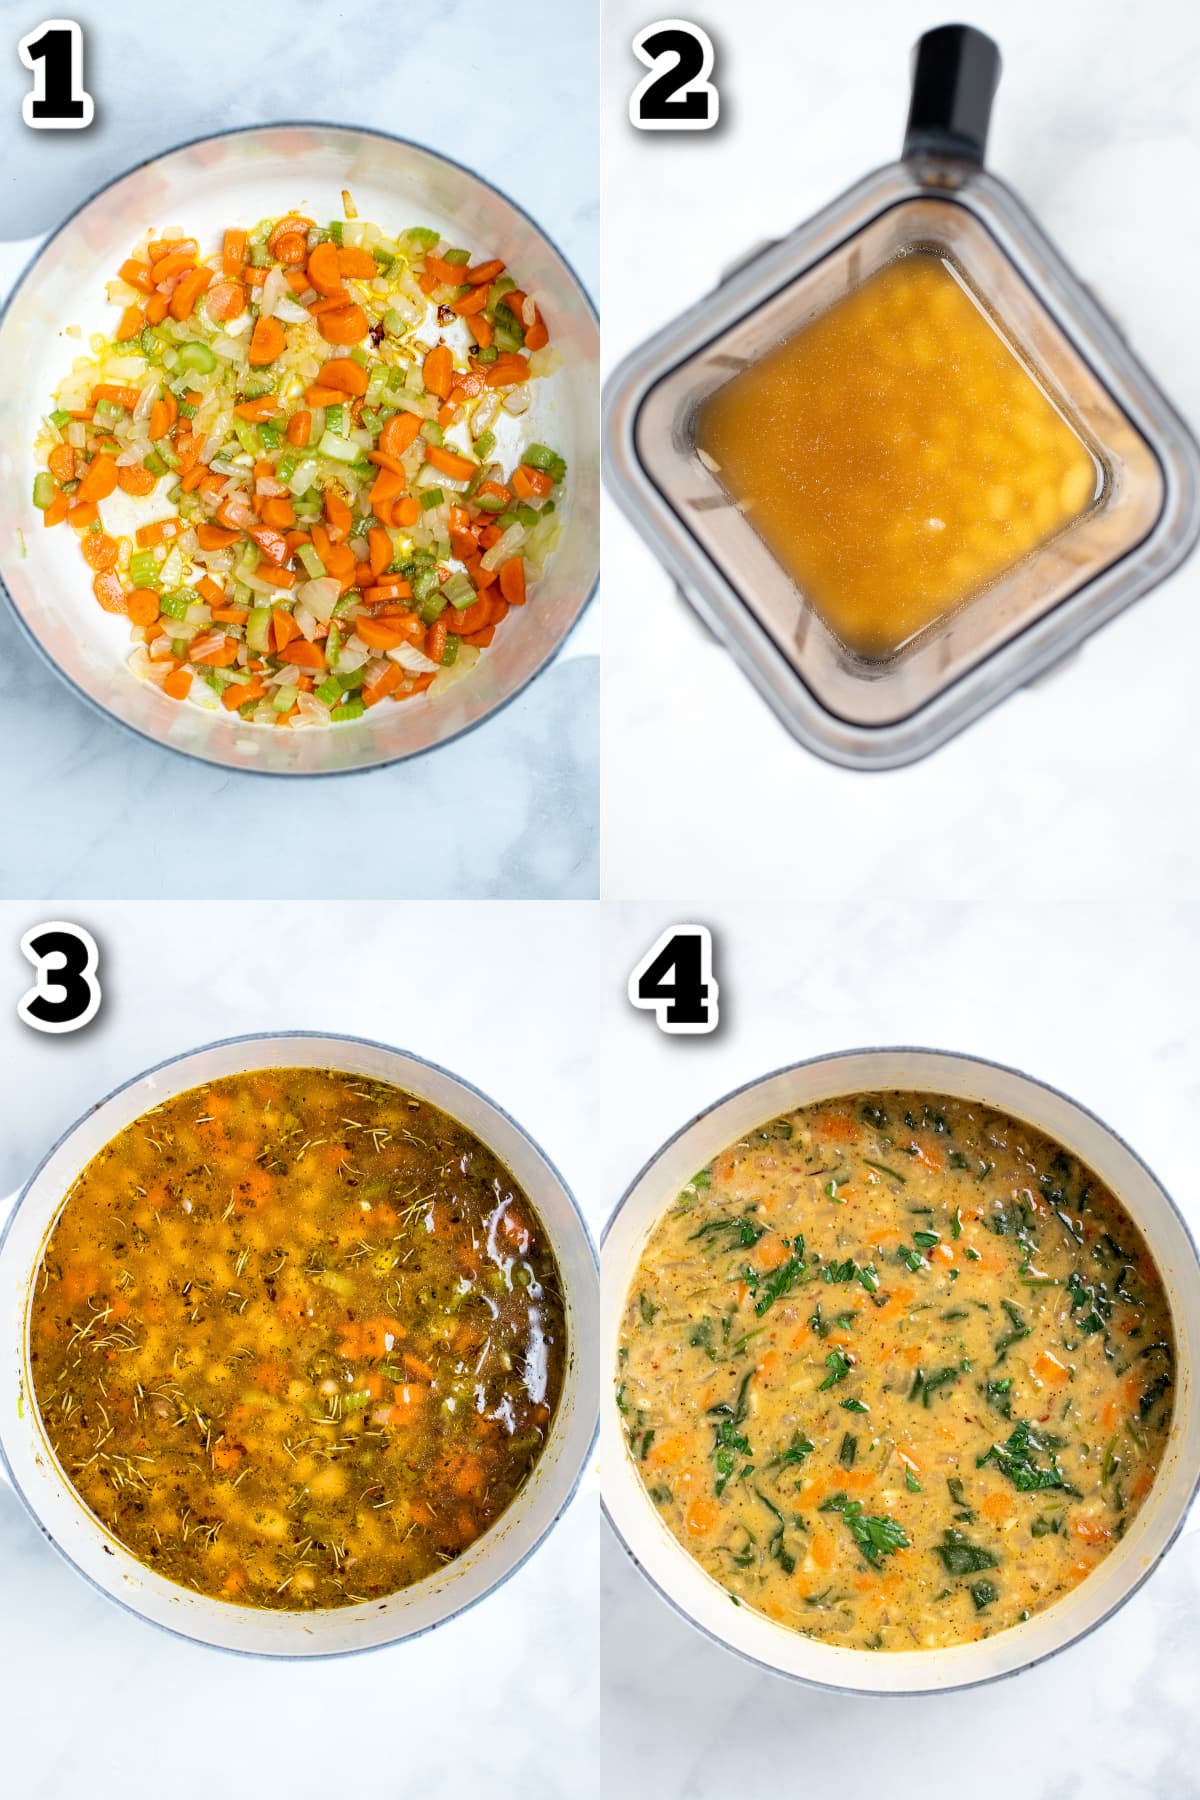 Step by step photos for how to make tuscan white bean soup.